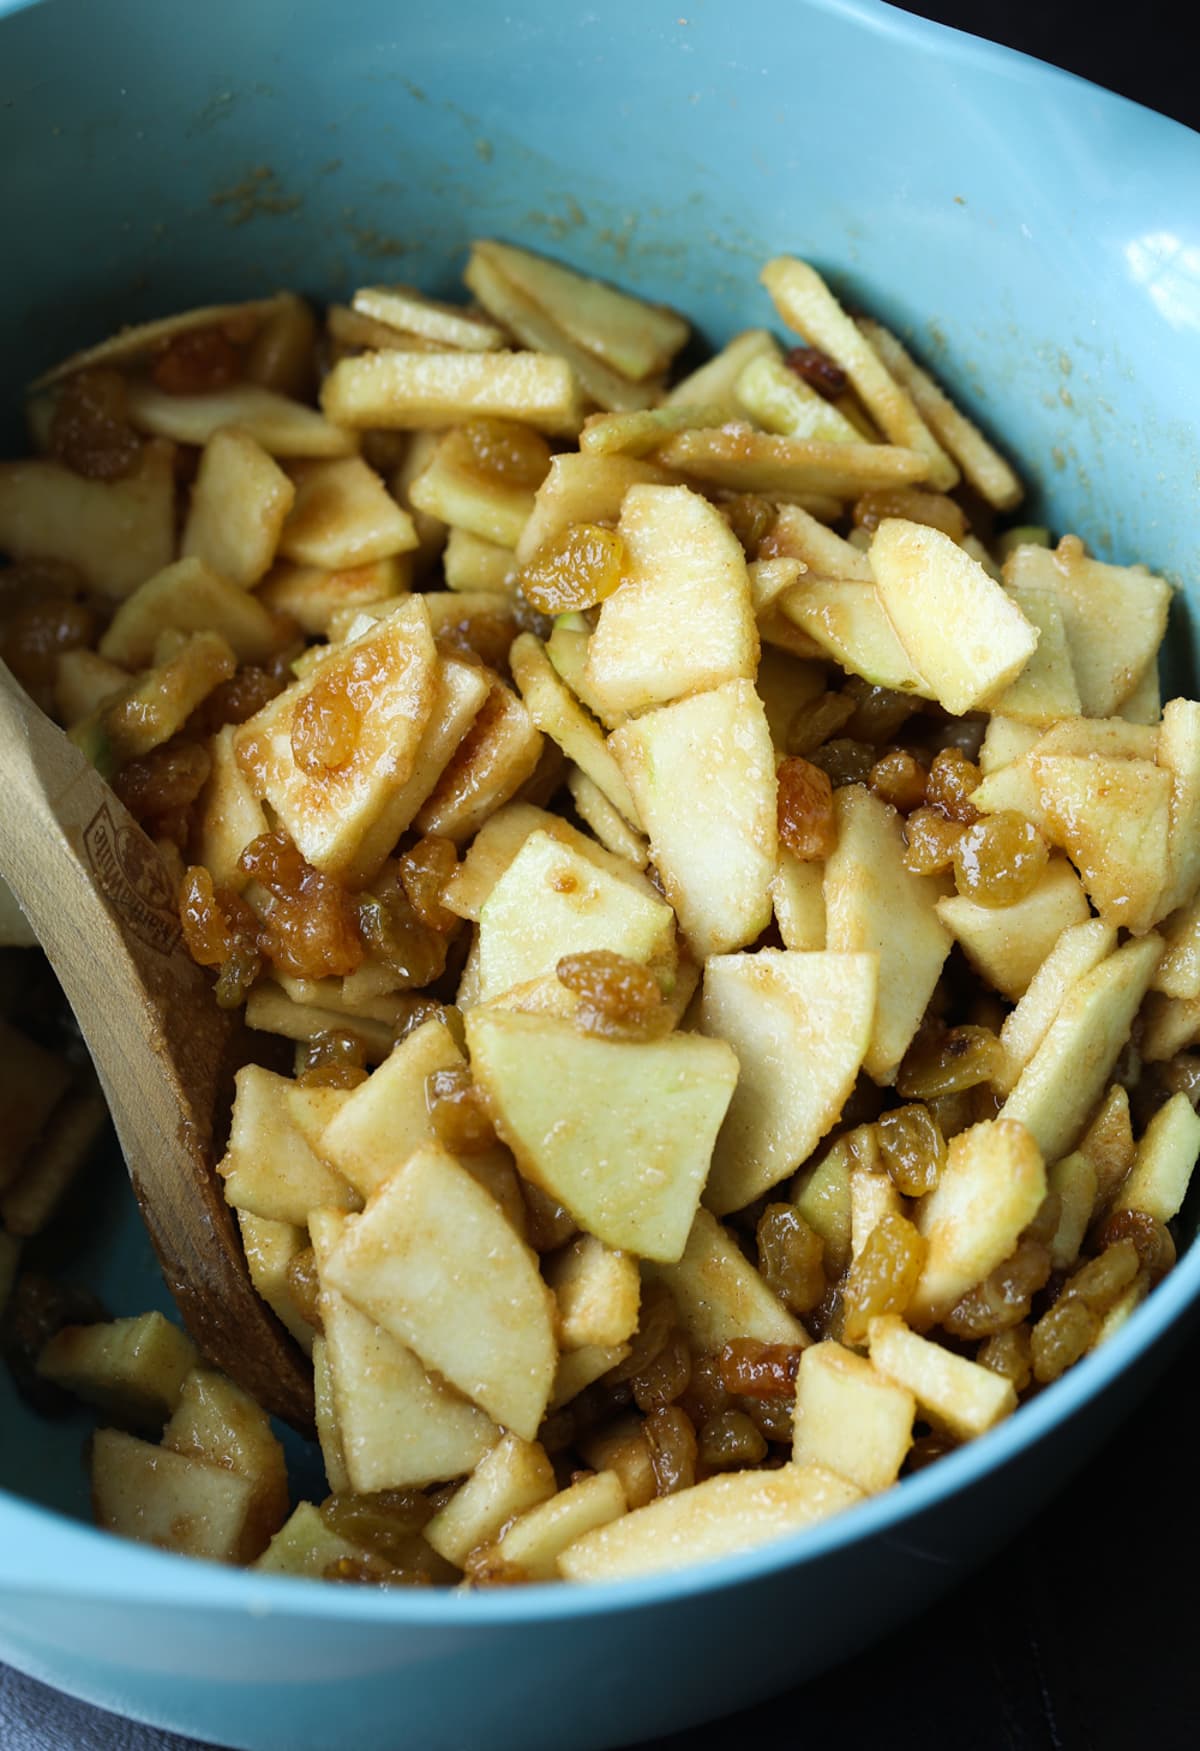 A blue bowl filled with chopped sliced apples coated in cinnamon sugar